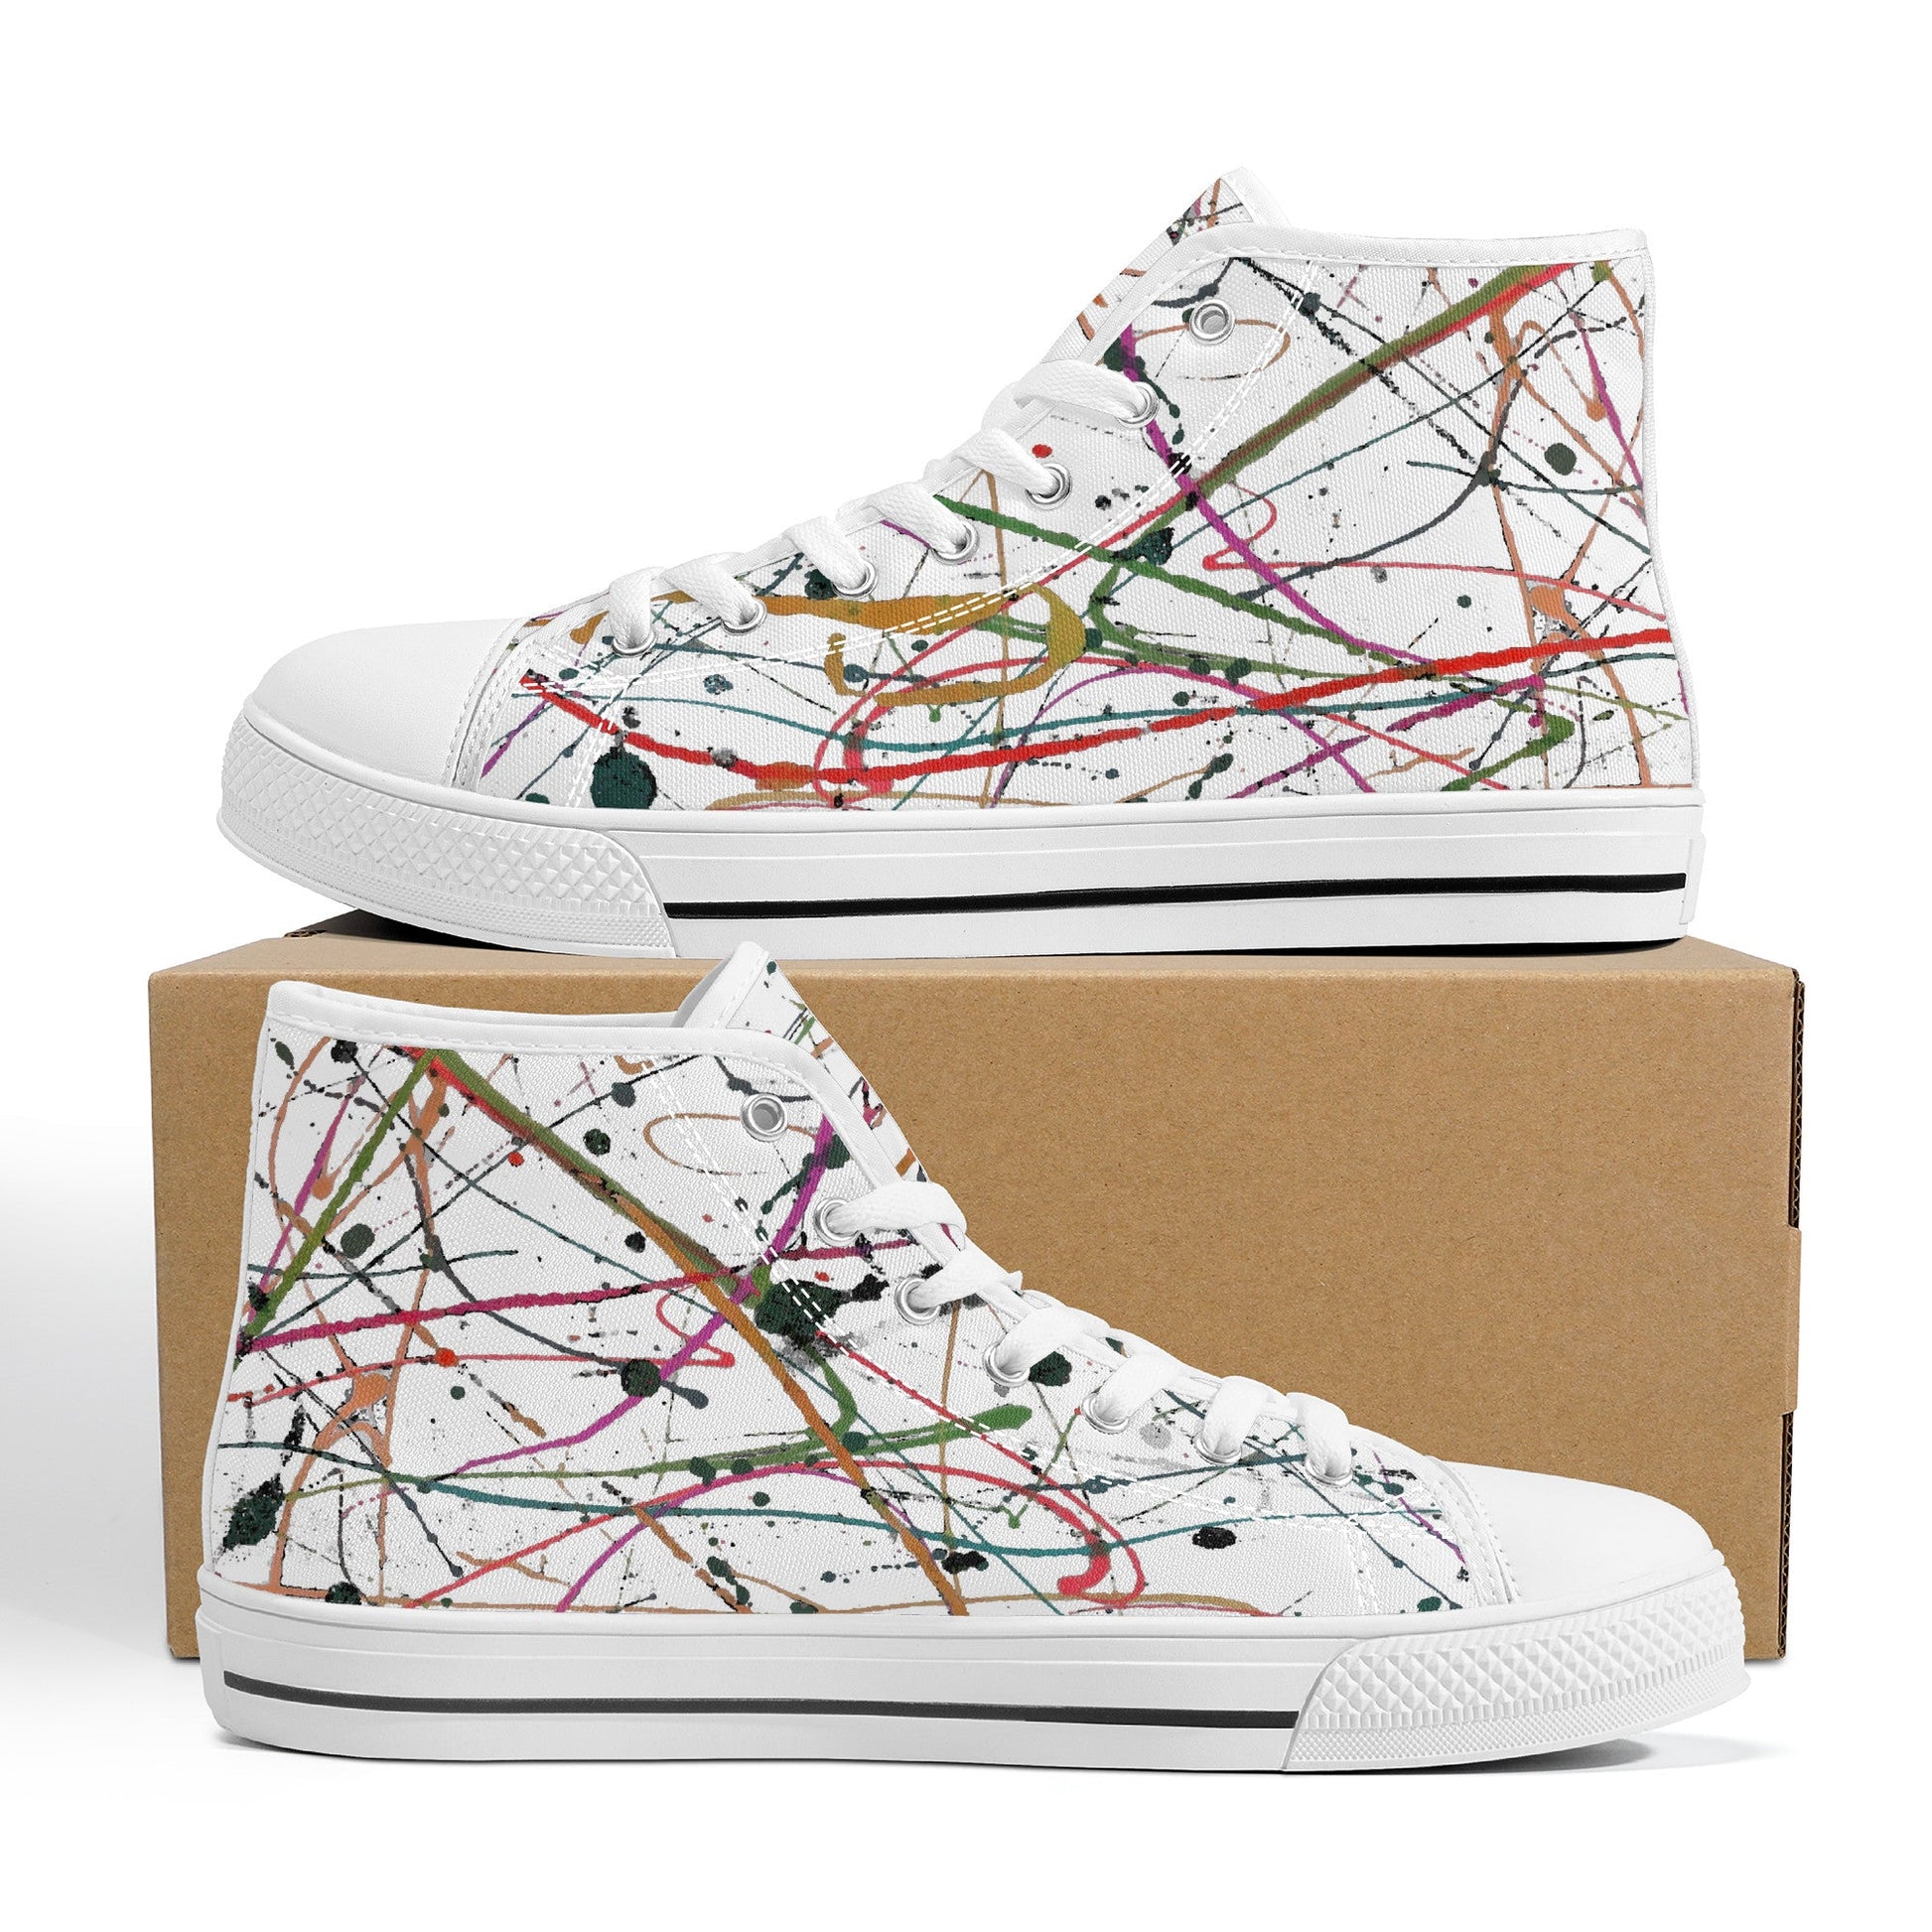 PAINTER's High Top Sneakers | CANAANWEAR | Shoes | PAINTER's